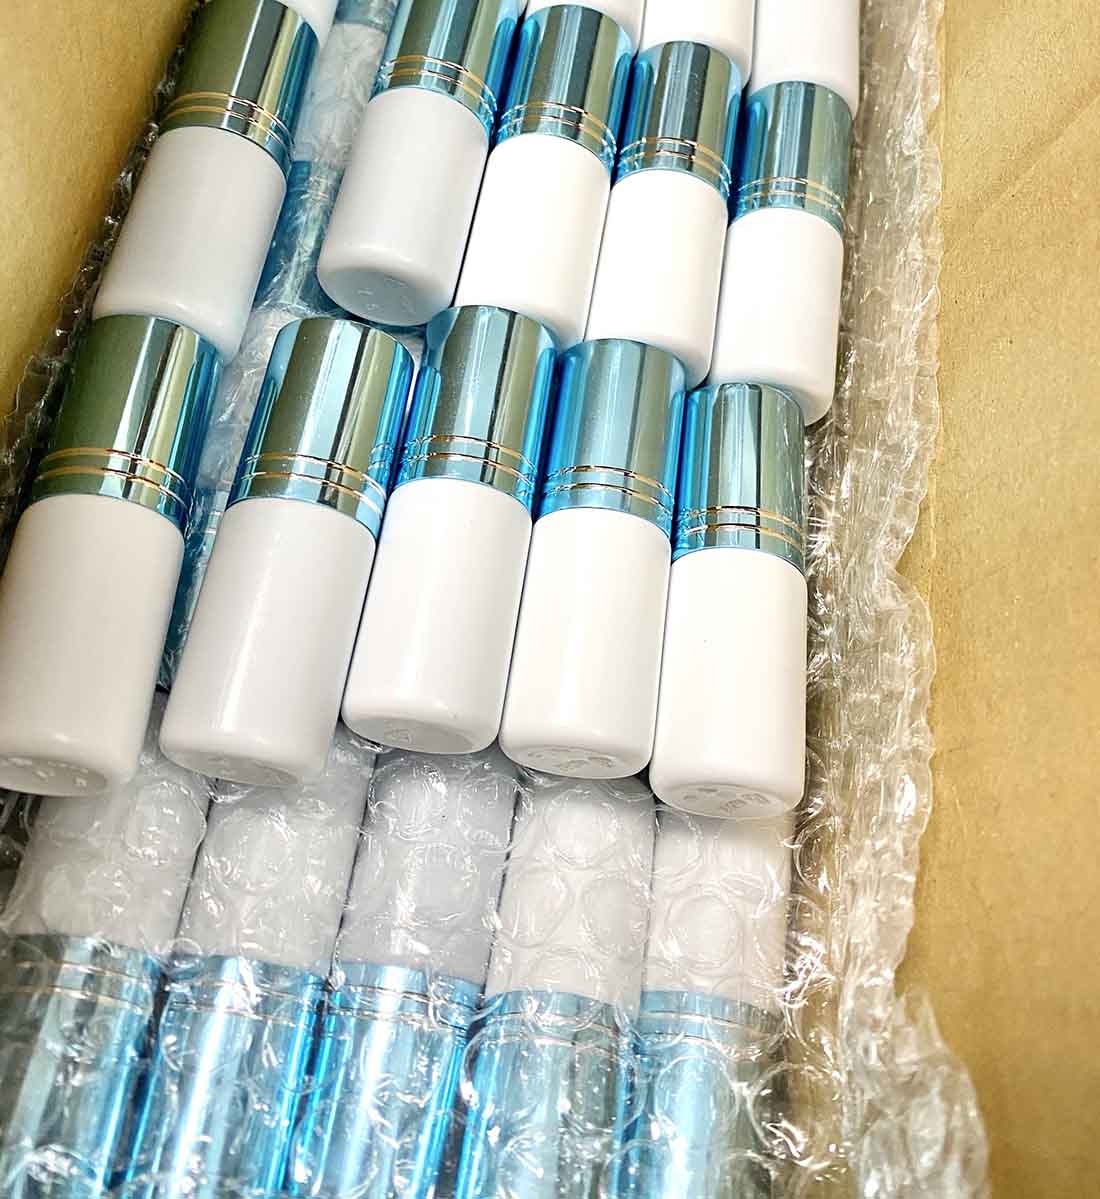 Lash Extension Glue Private Label Bulk Order - No Labeled Bottle 【not all colors are in stock , please contact us to check. If not in stock , we will ship in about two weeks】